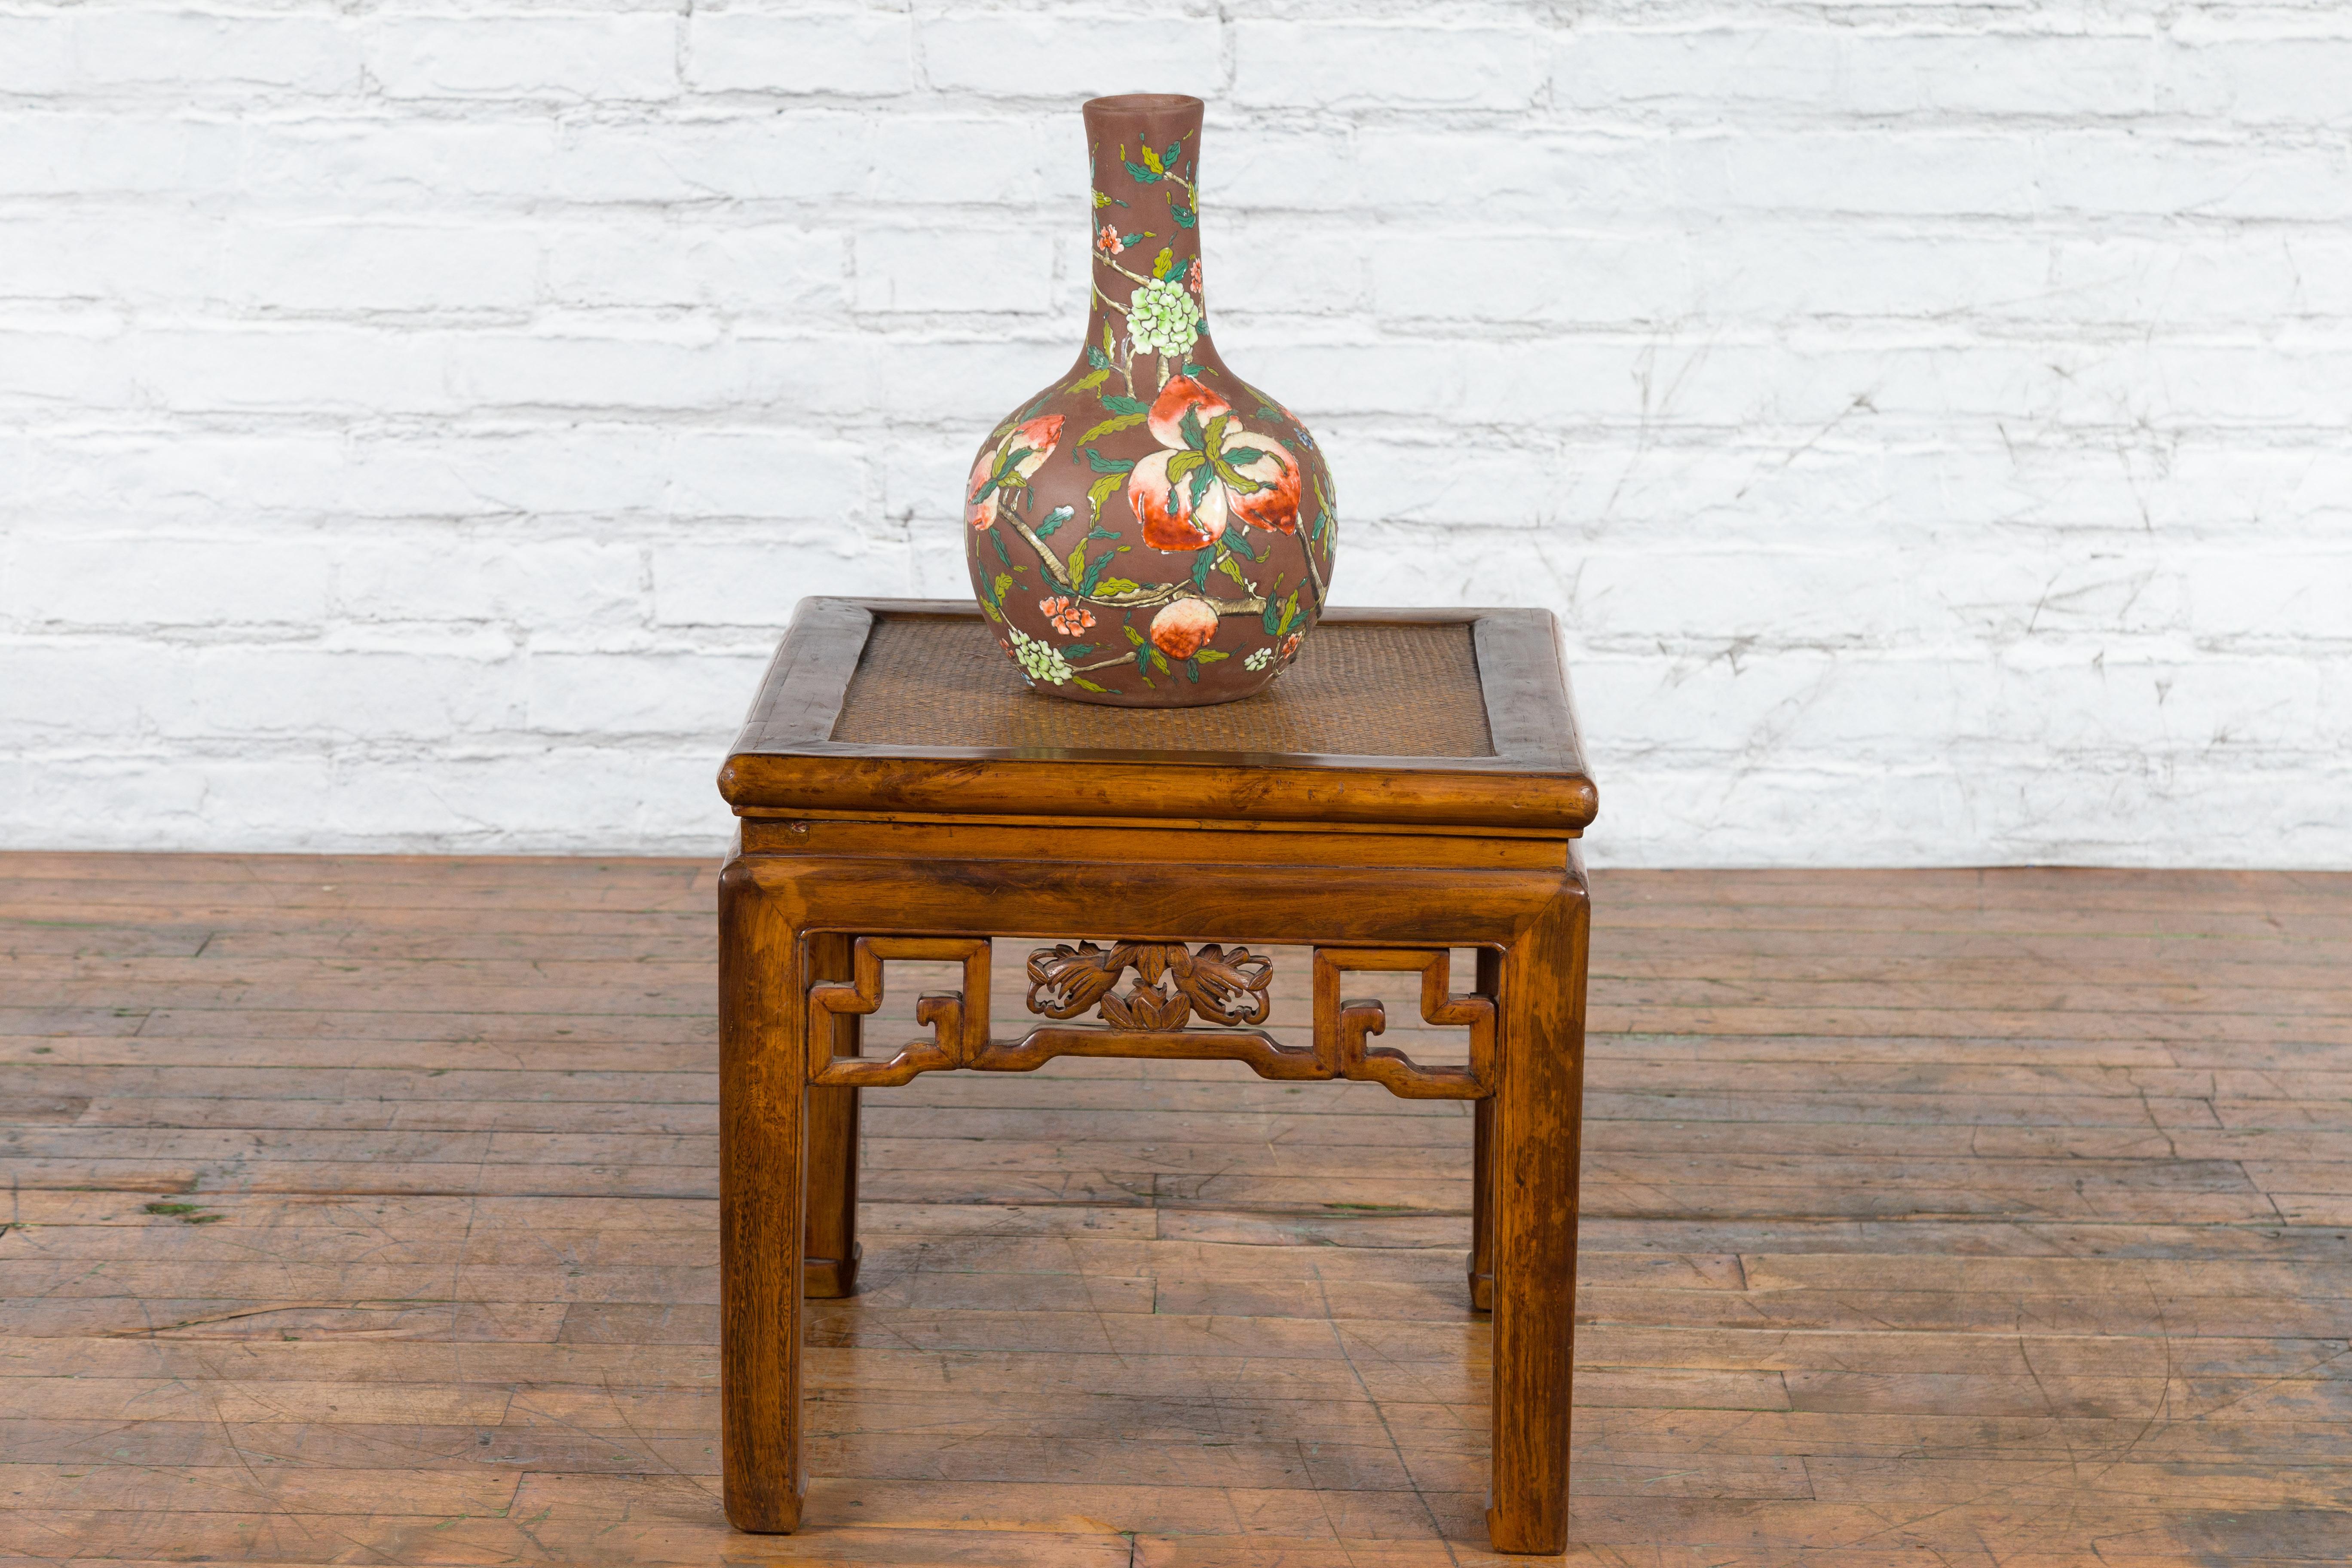 A Chinese Qing Dynasty period side table from the 19th century, with woven rattan mat, fretwork apron and carved foliage. Created in China during the Qing Dynasty period in the 19th century, this side table features a square waisted top with central